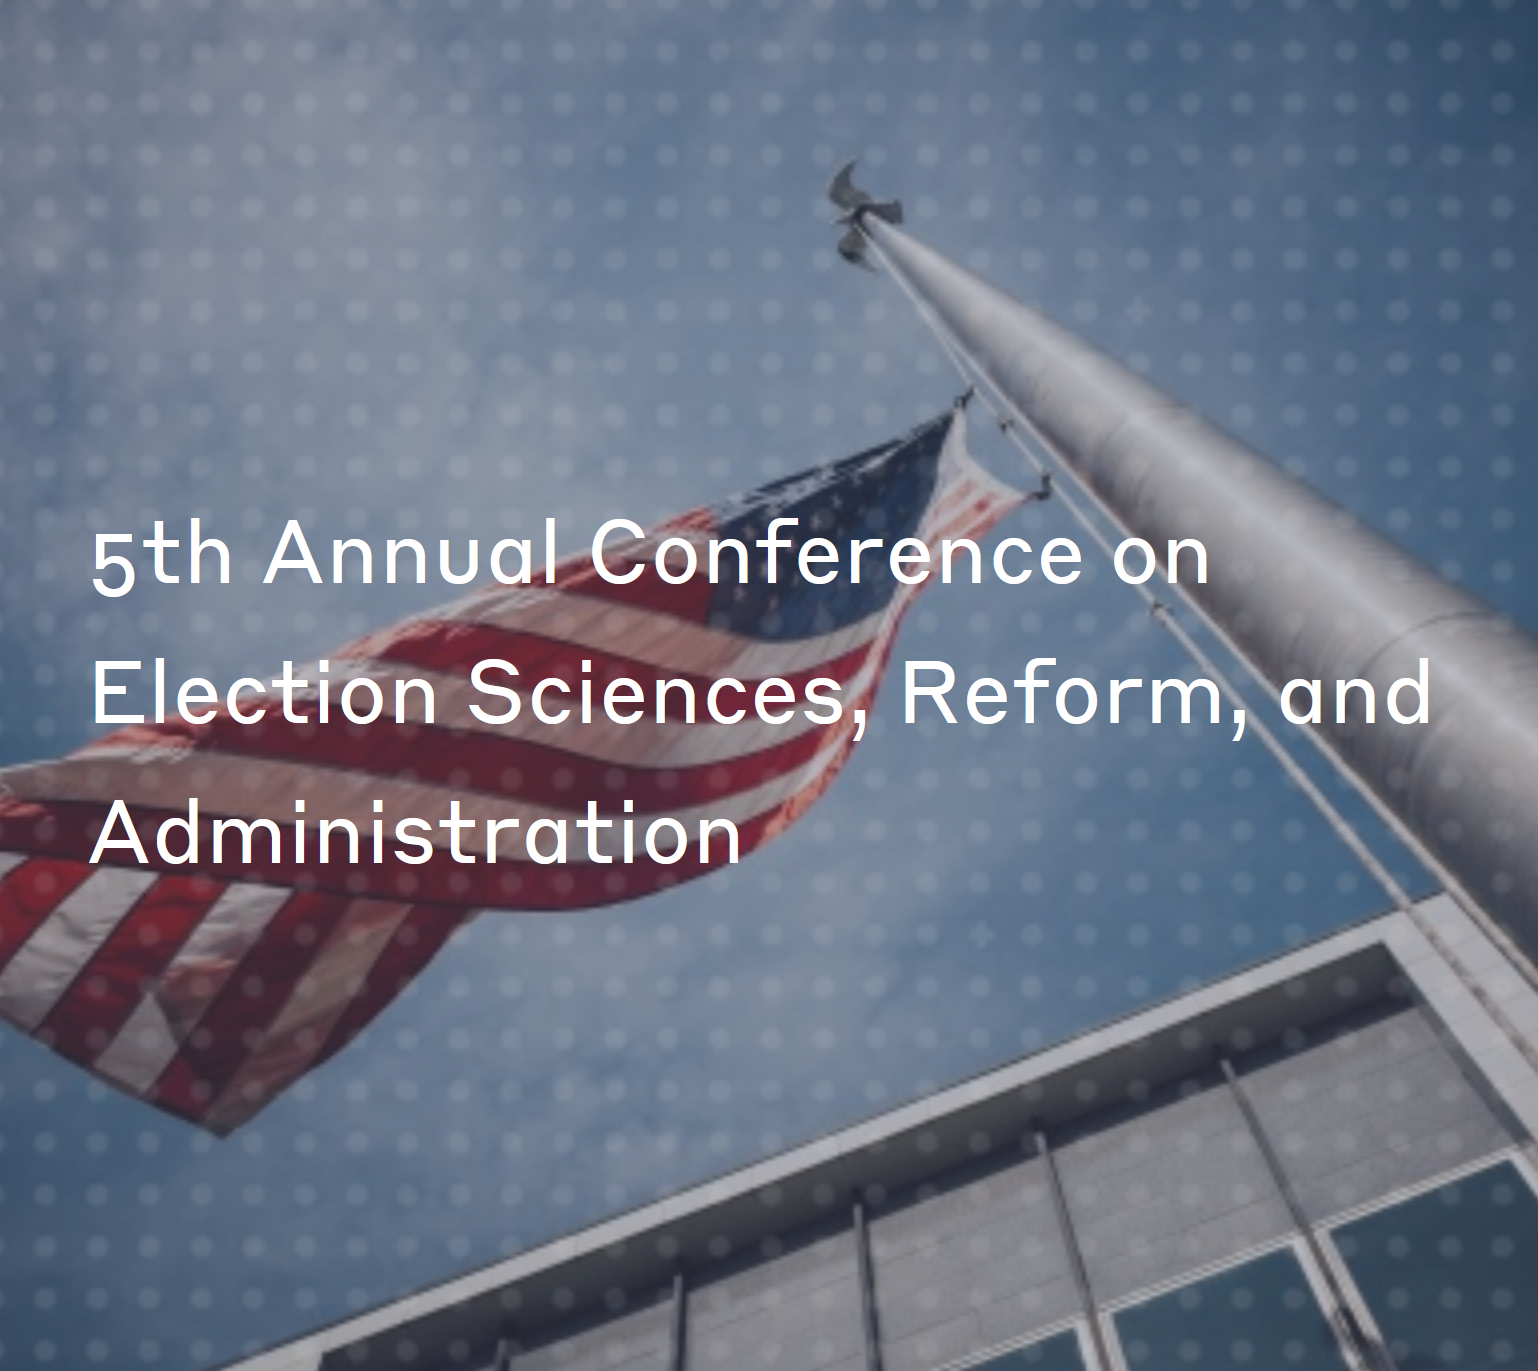 A picture of an American flag on a flag pole. Text over the image says "5th Annual Conference on Election Science, Reform, and Administration"